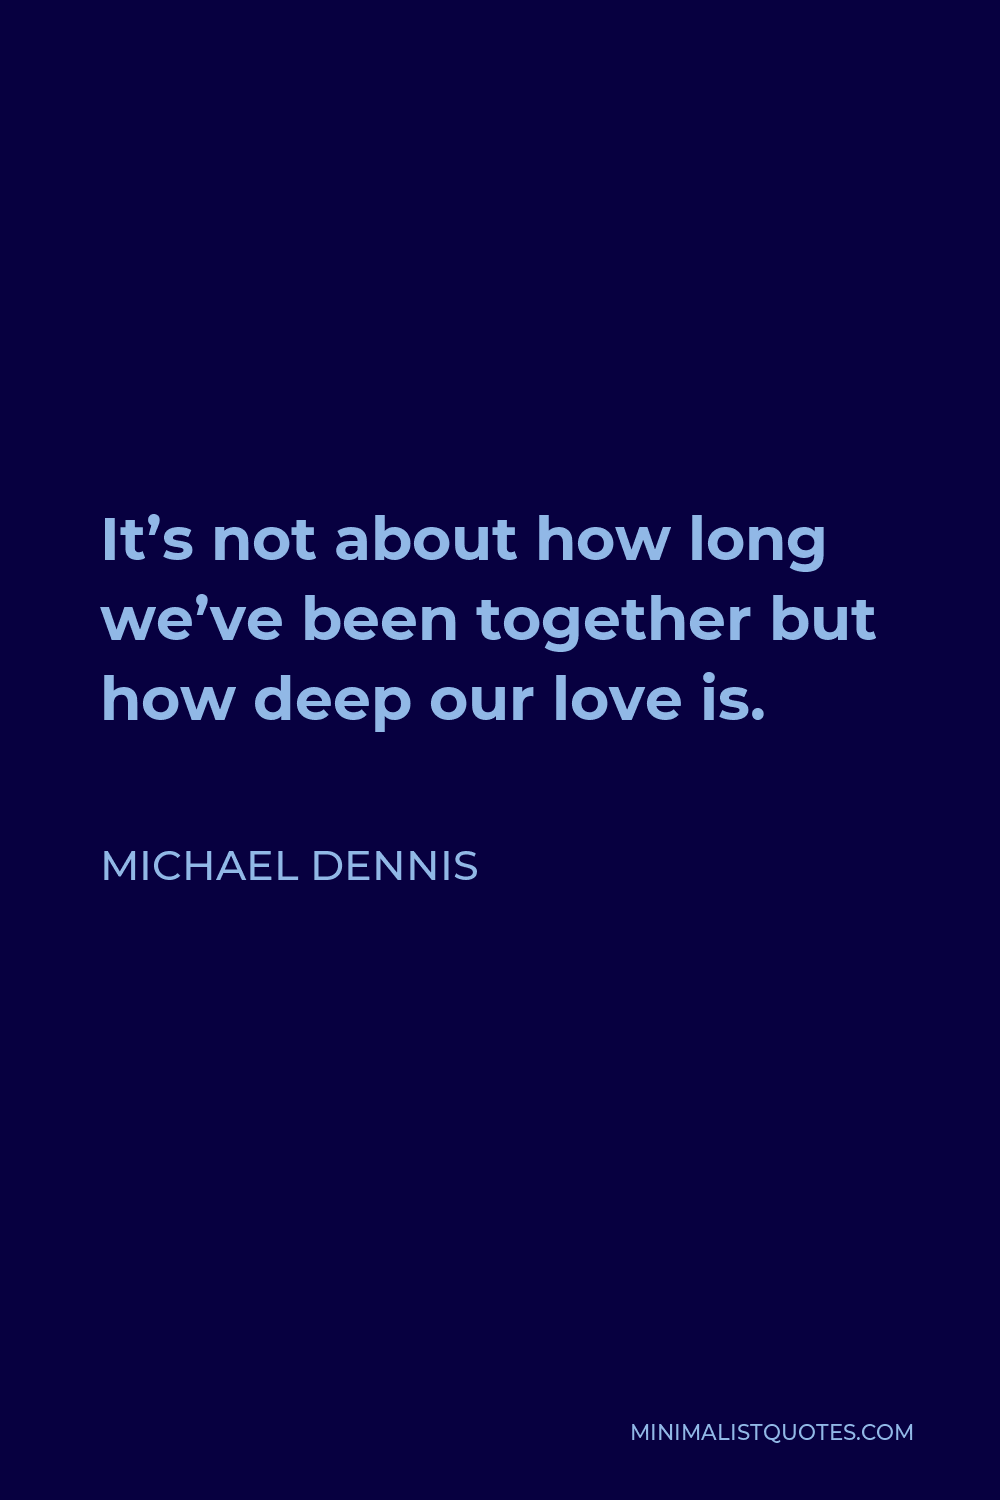 Michael Dennis Quote - It’s not about how long we’ve been together but how deep our love is.